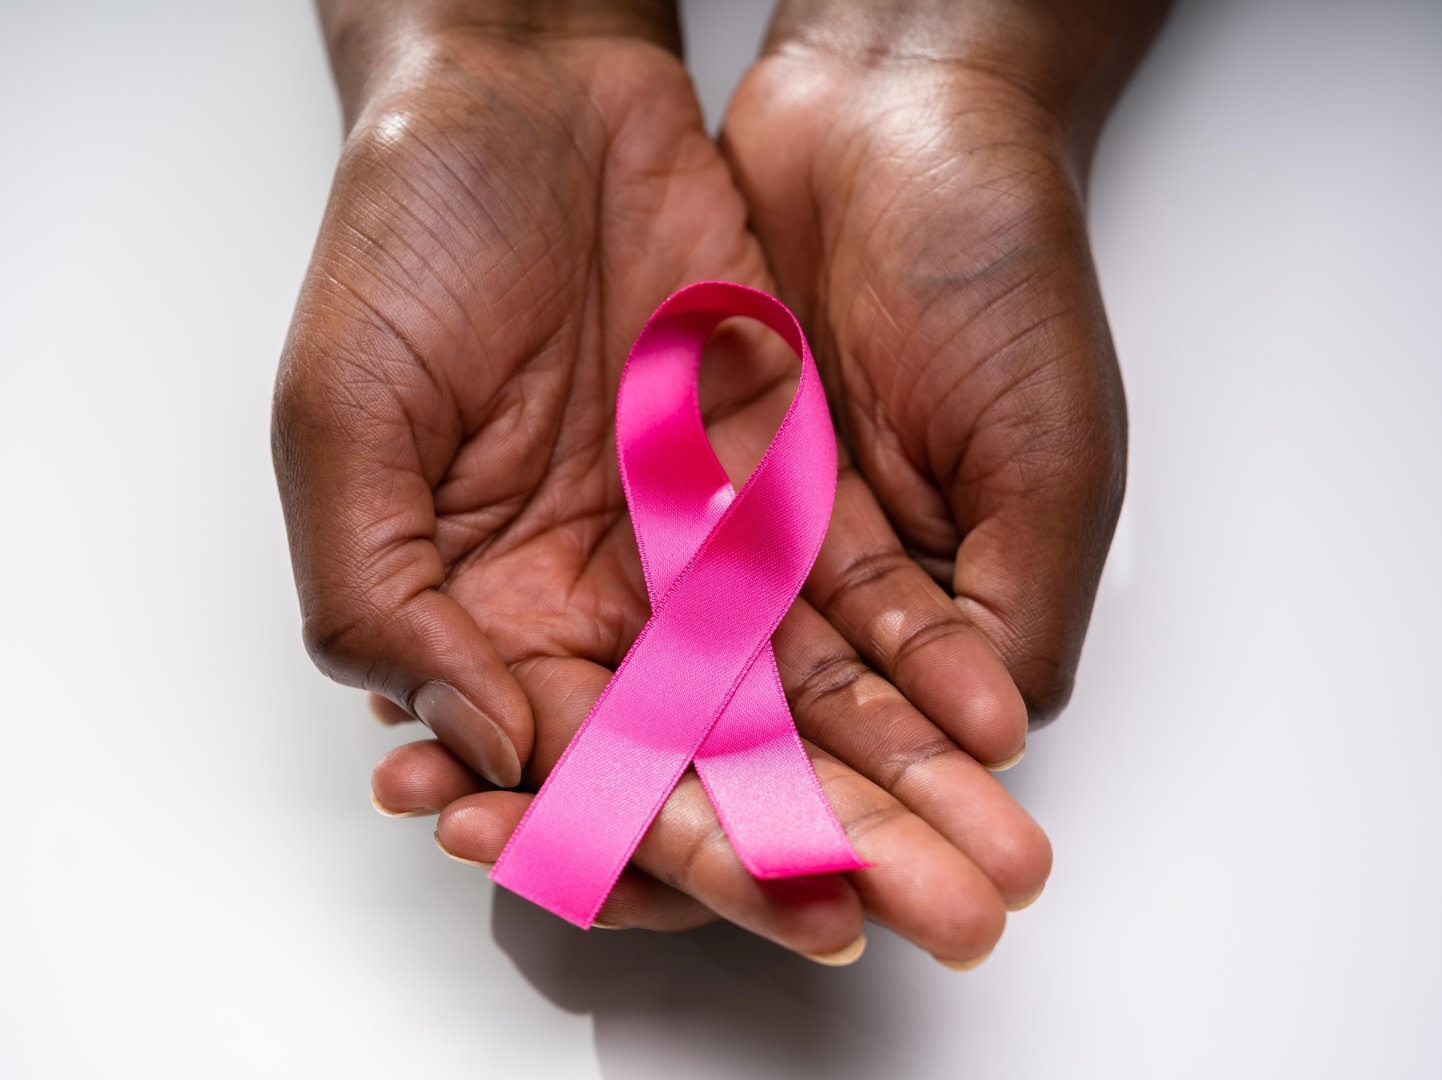 Some breast cancer patients can retain lymph nodes avoiding lymphedema